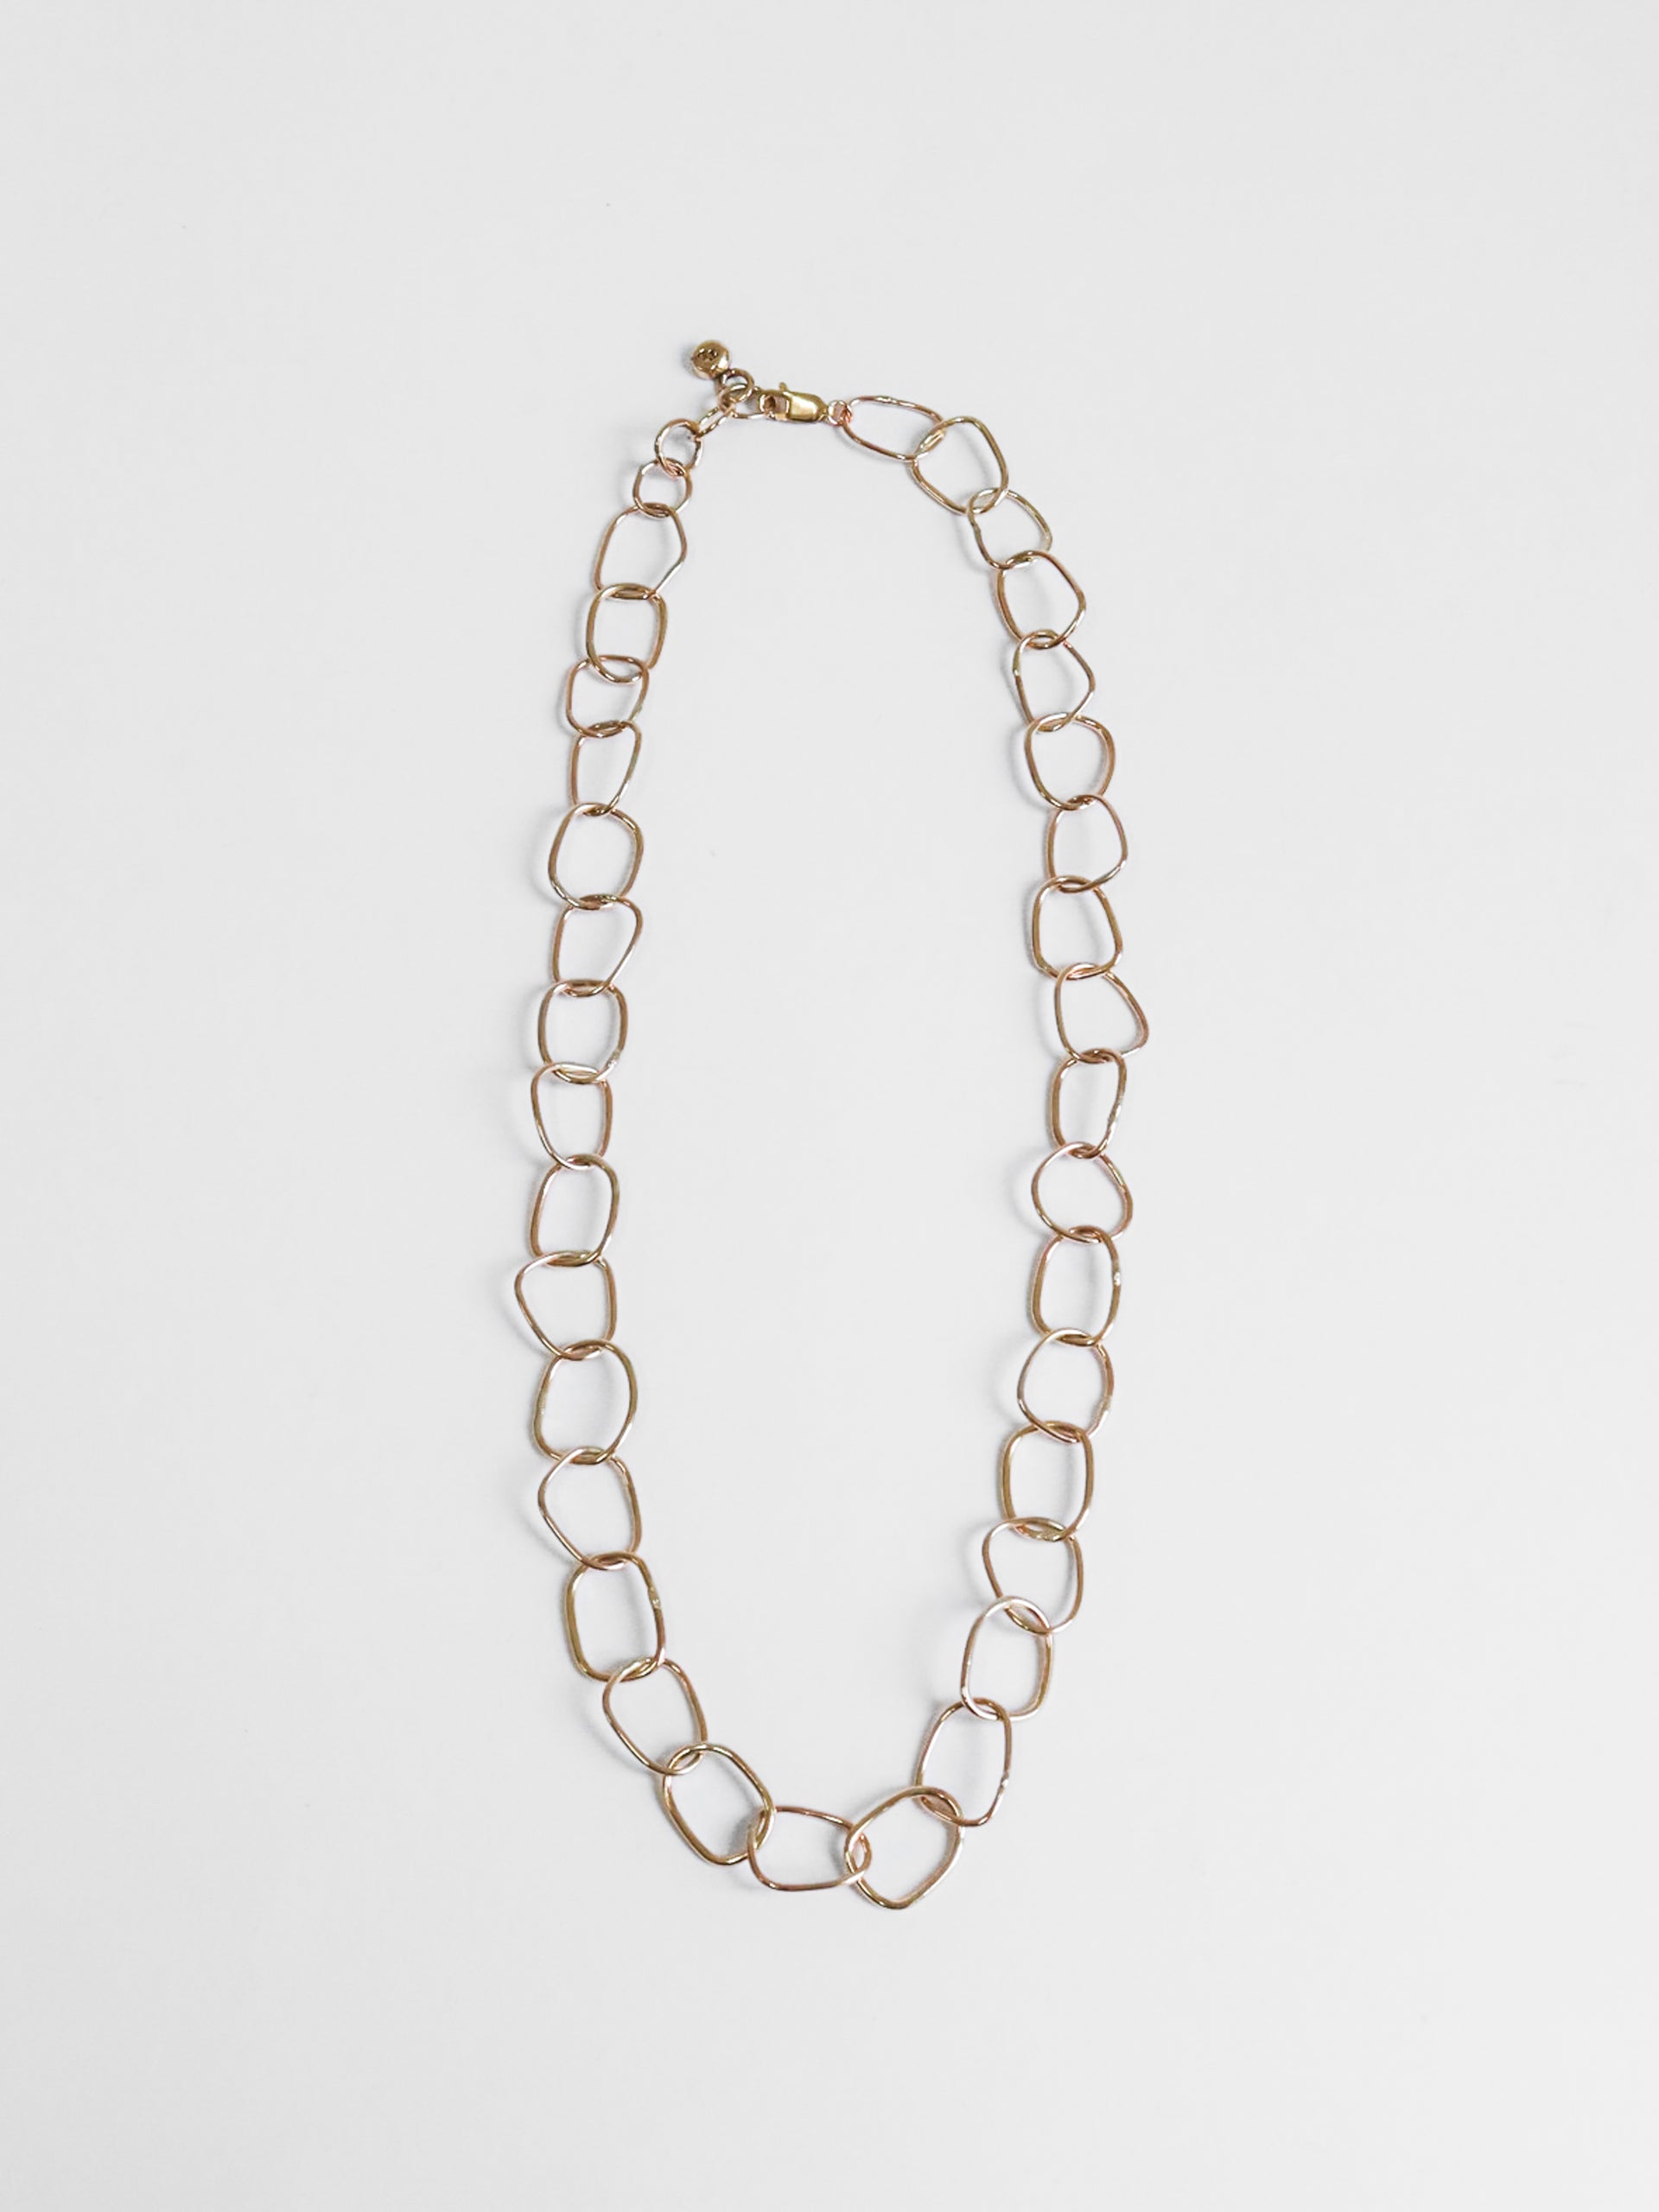 The-Lair-Jewellery-Noguchi-Necklace-9ct-Yellow-Gold